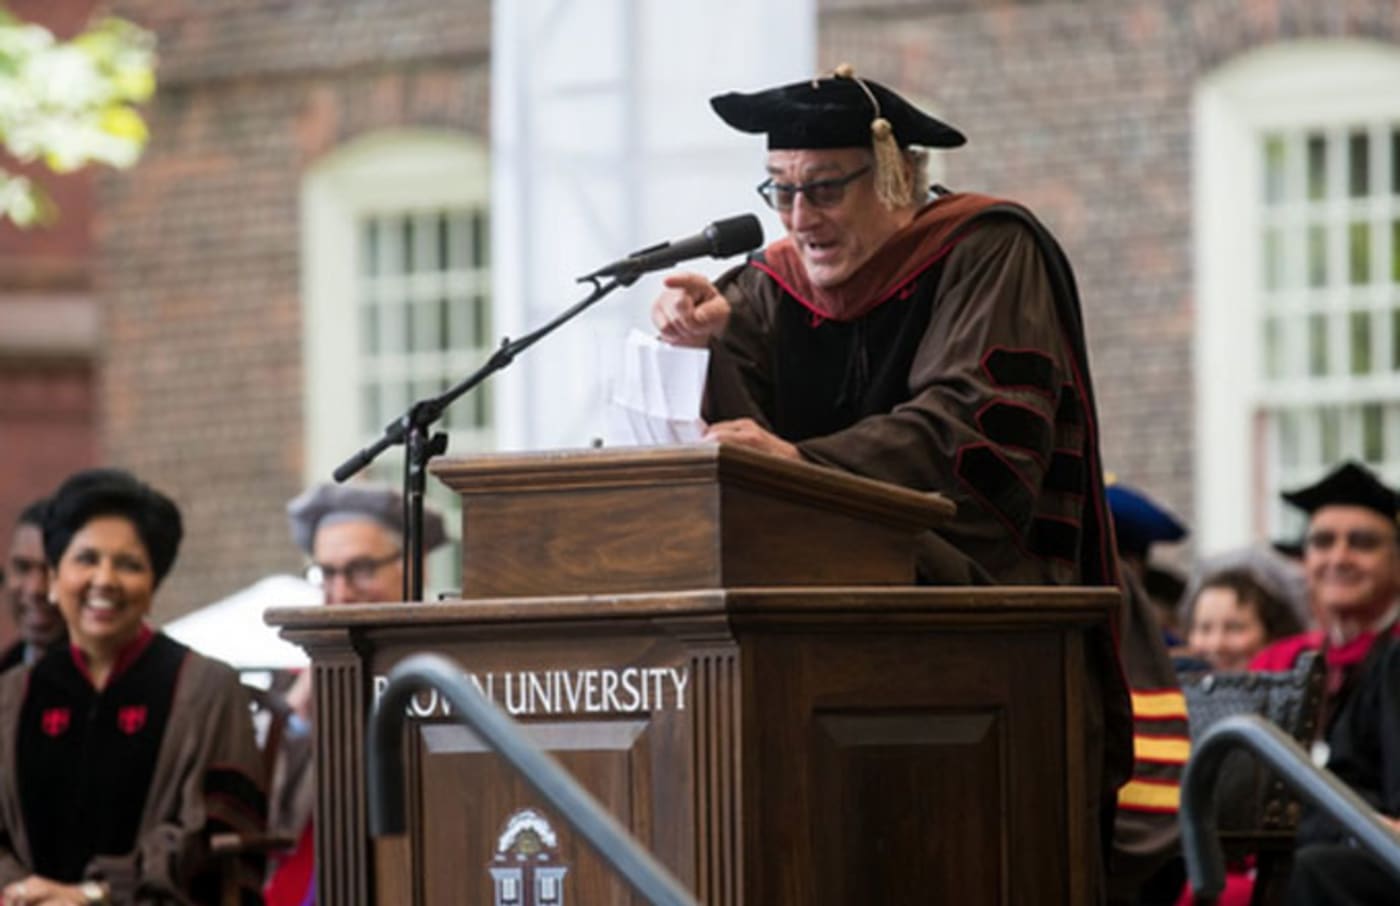 Robert Deniro at the lectern for a commencement speech at Brown University.